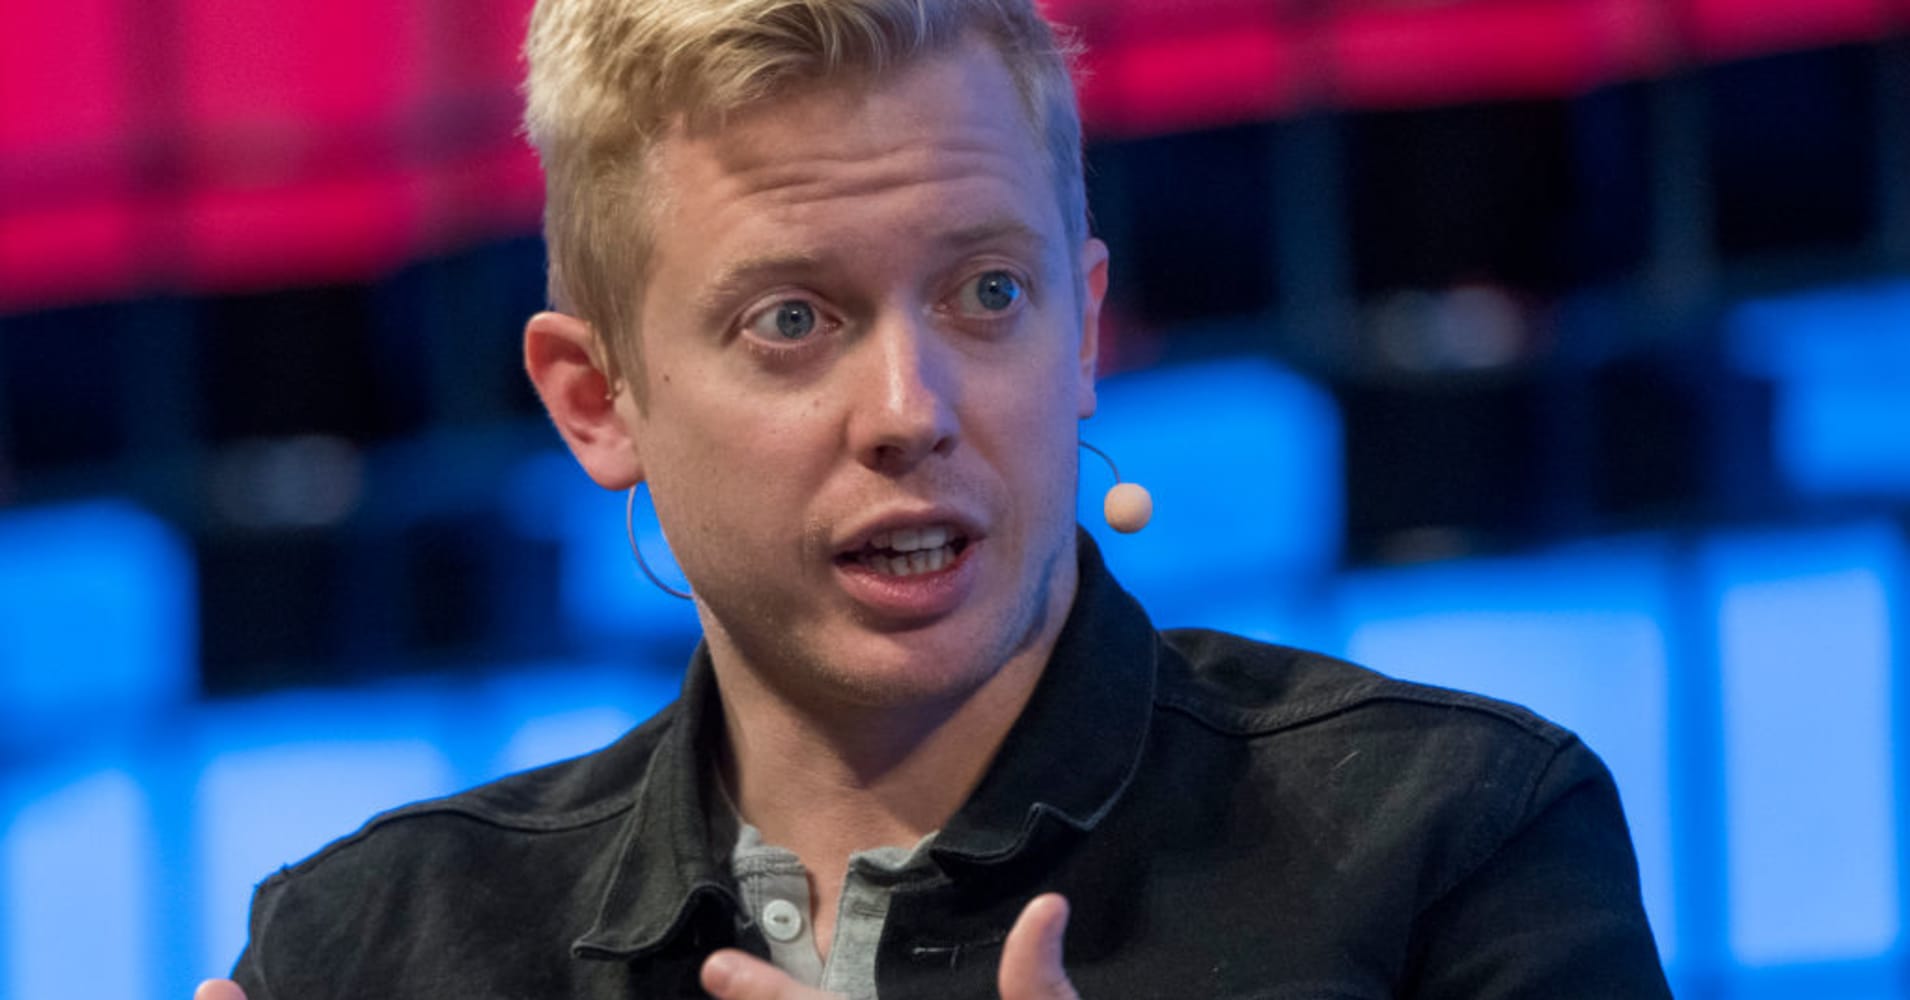 Reddit raised $300 million at a $3 billion valuation — now it's ready to take on Facebook and Google